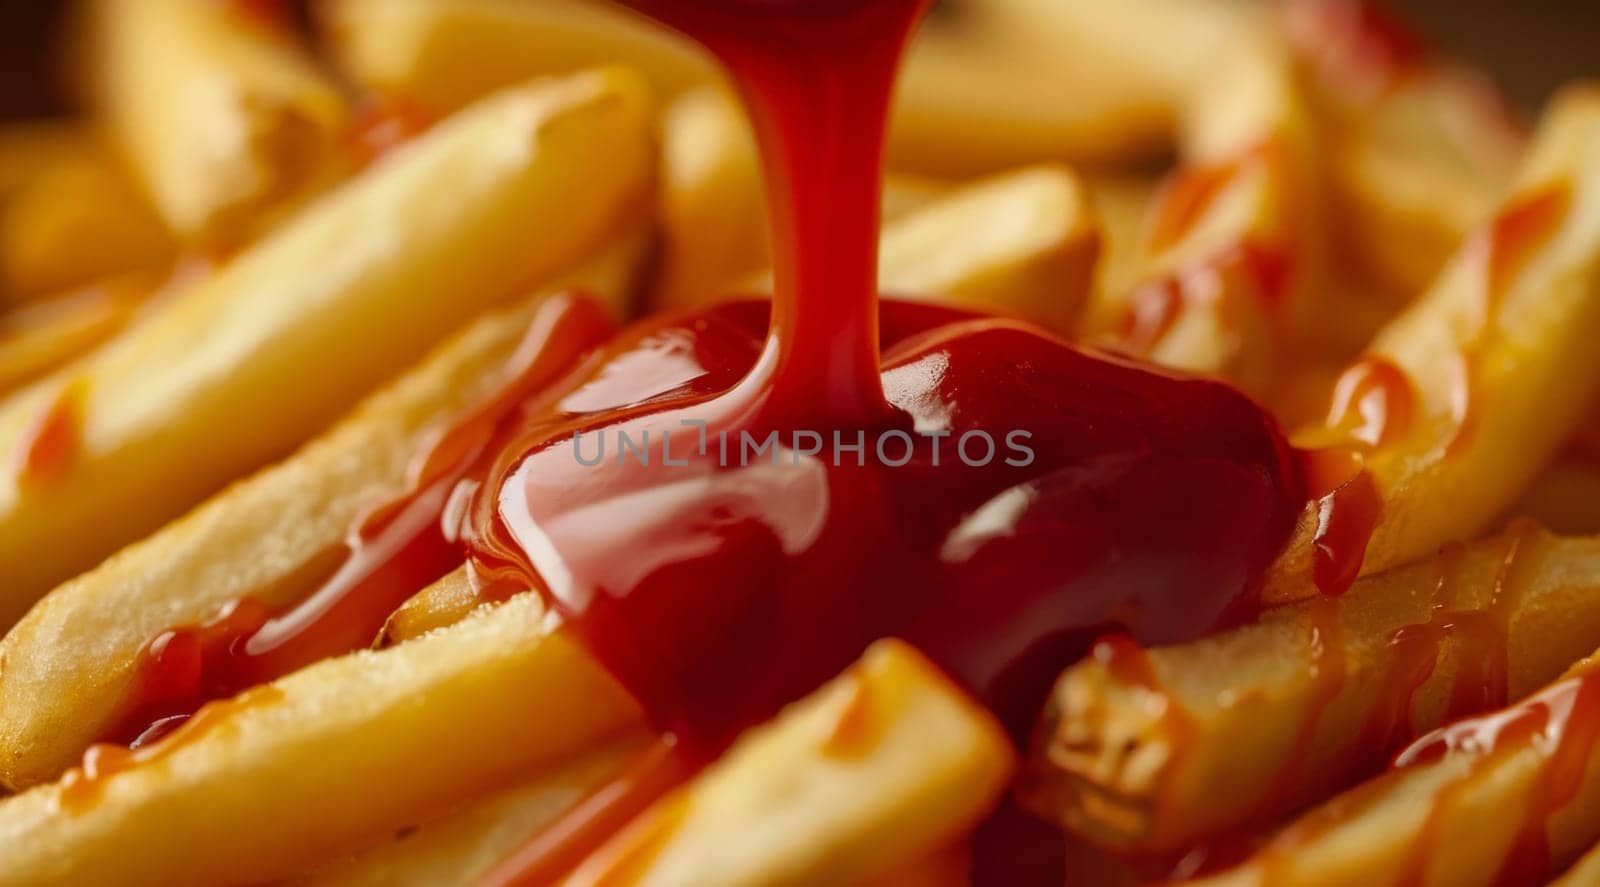 Closeup shot of tomato ketchup being poured onto french fries by papatonic